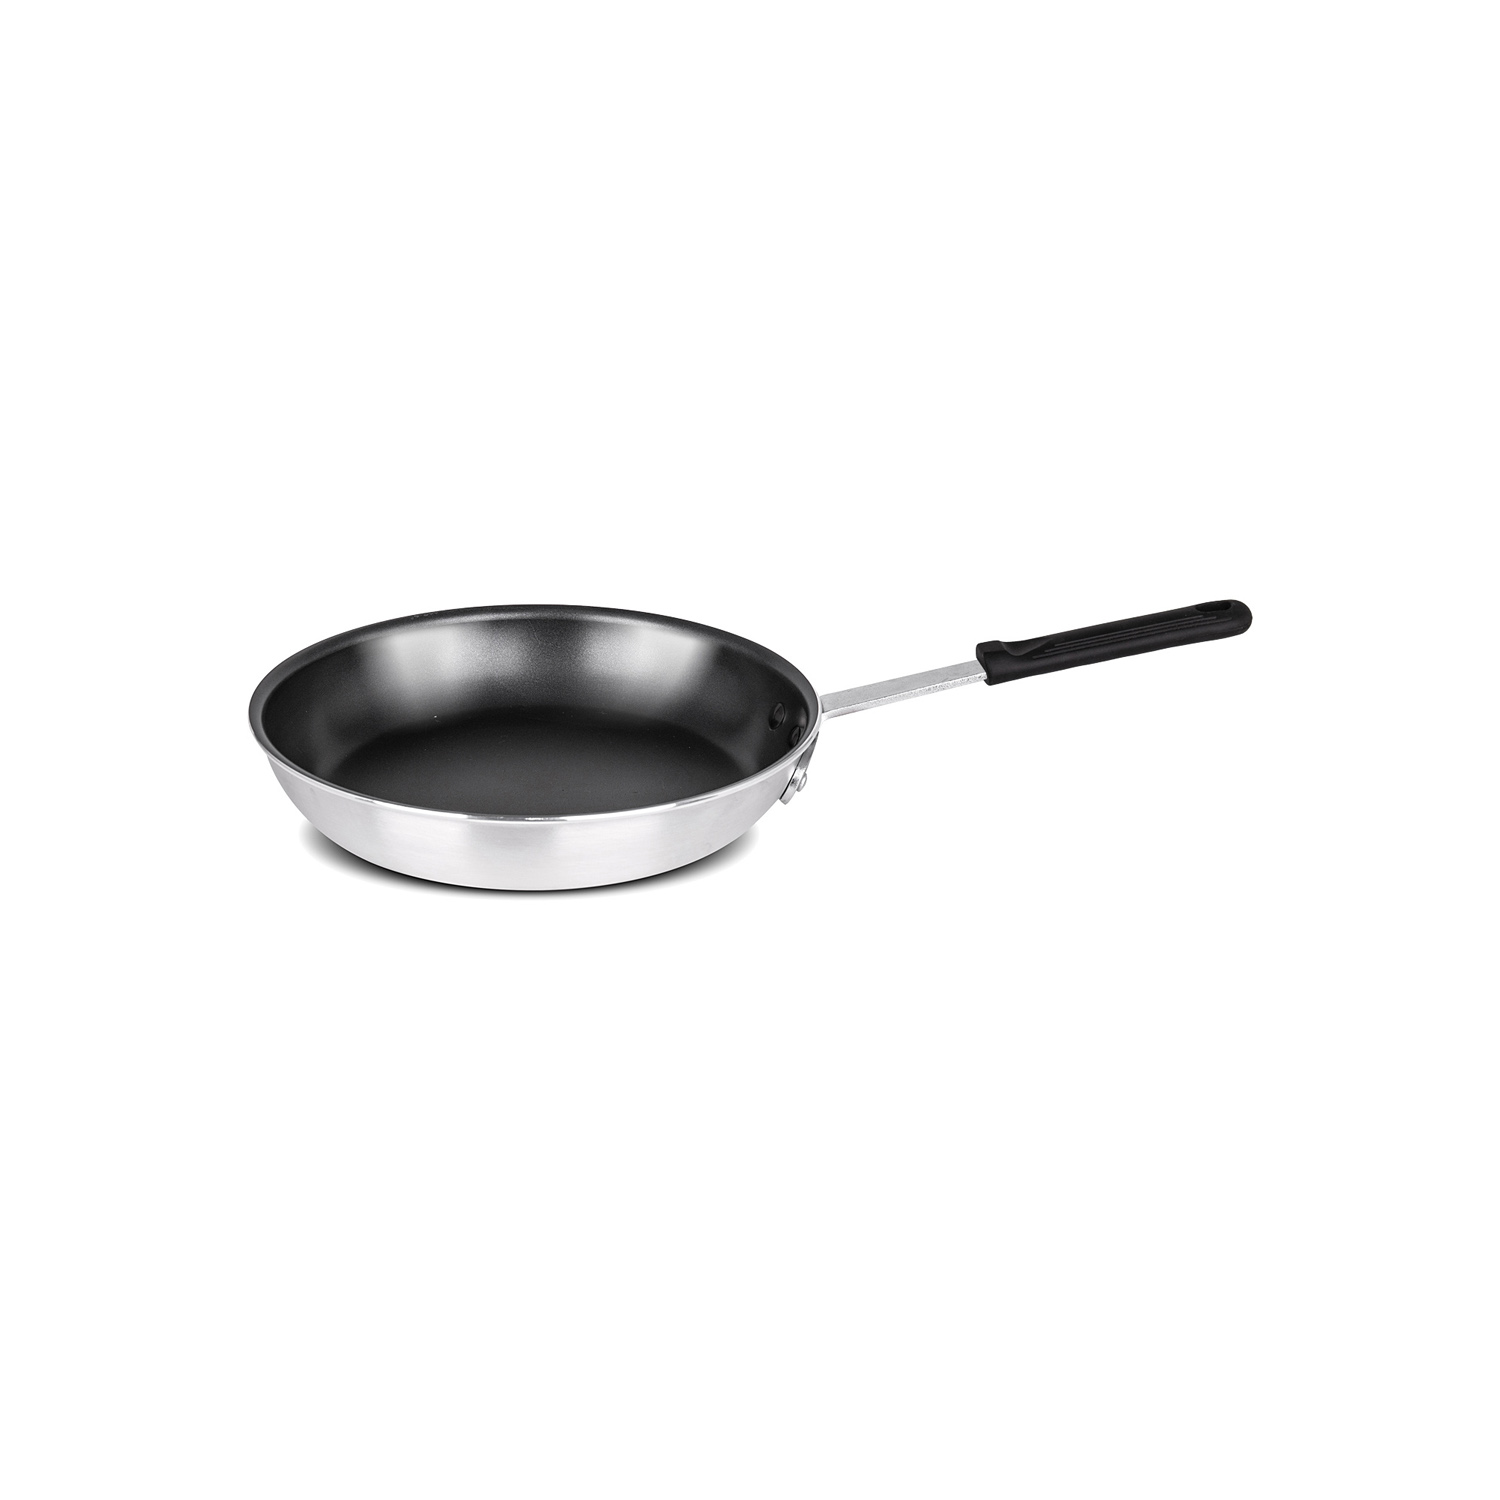 CAC China A4FP-10NL Non-Stick Aluminum Fry Pan with Sleeve 10"